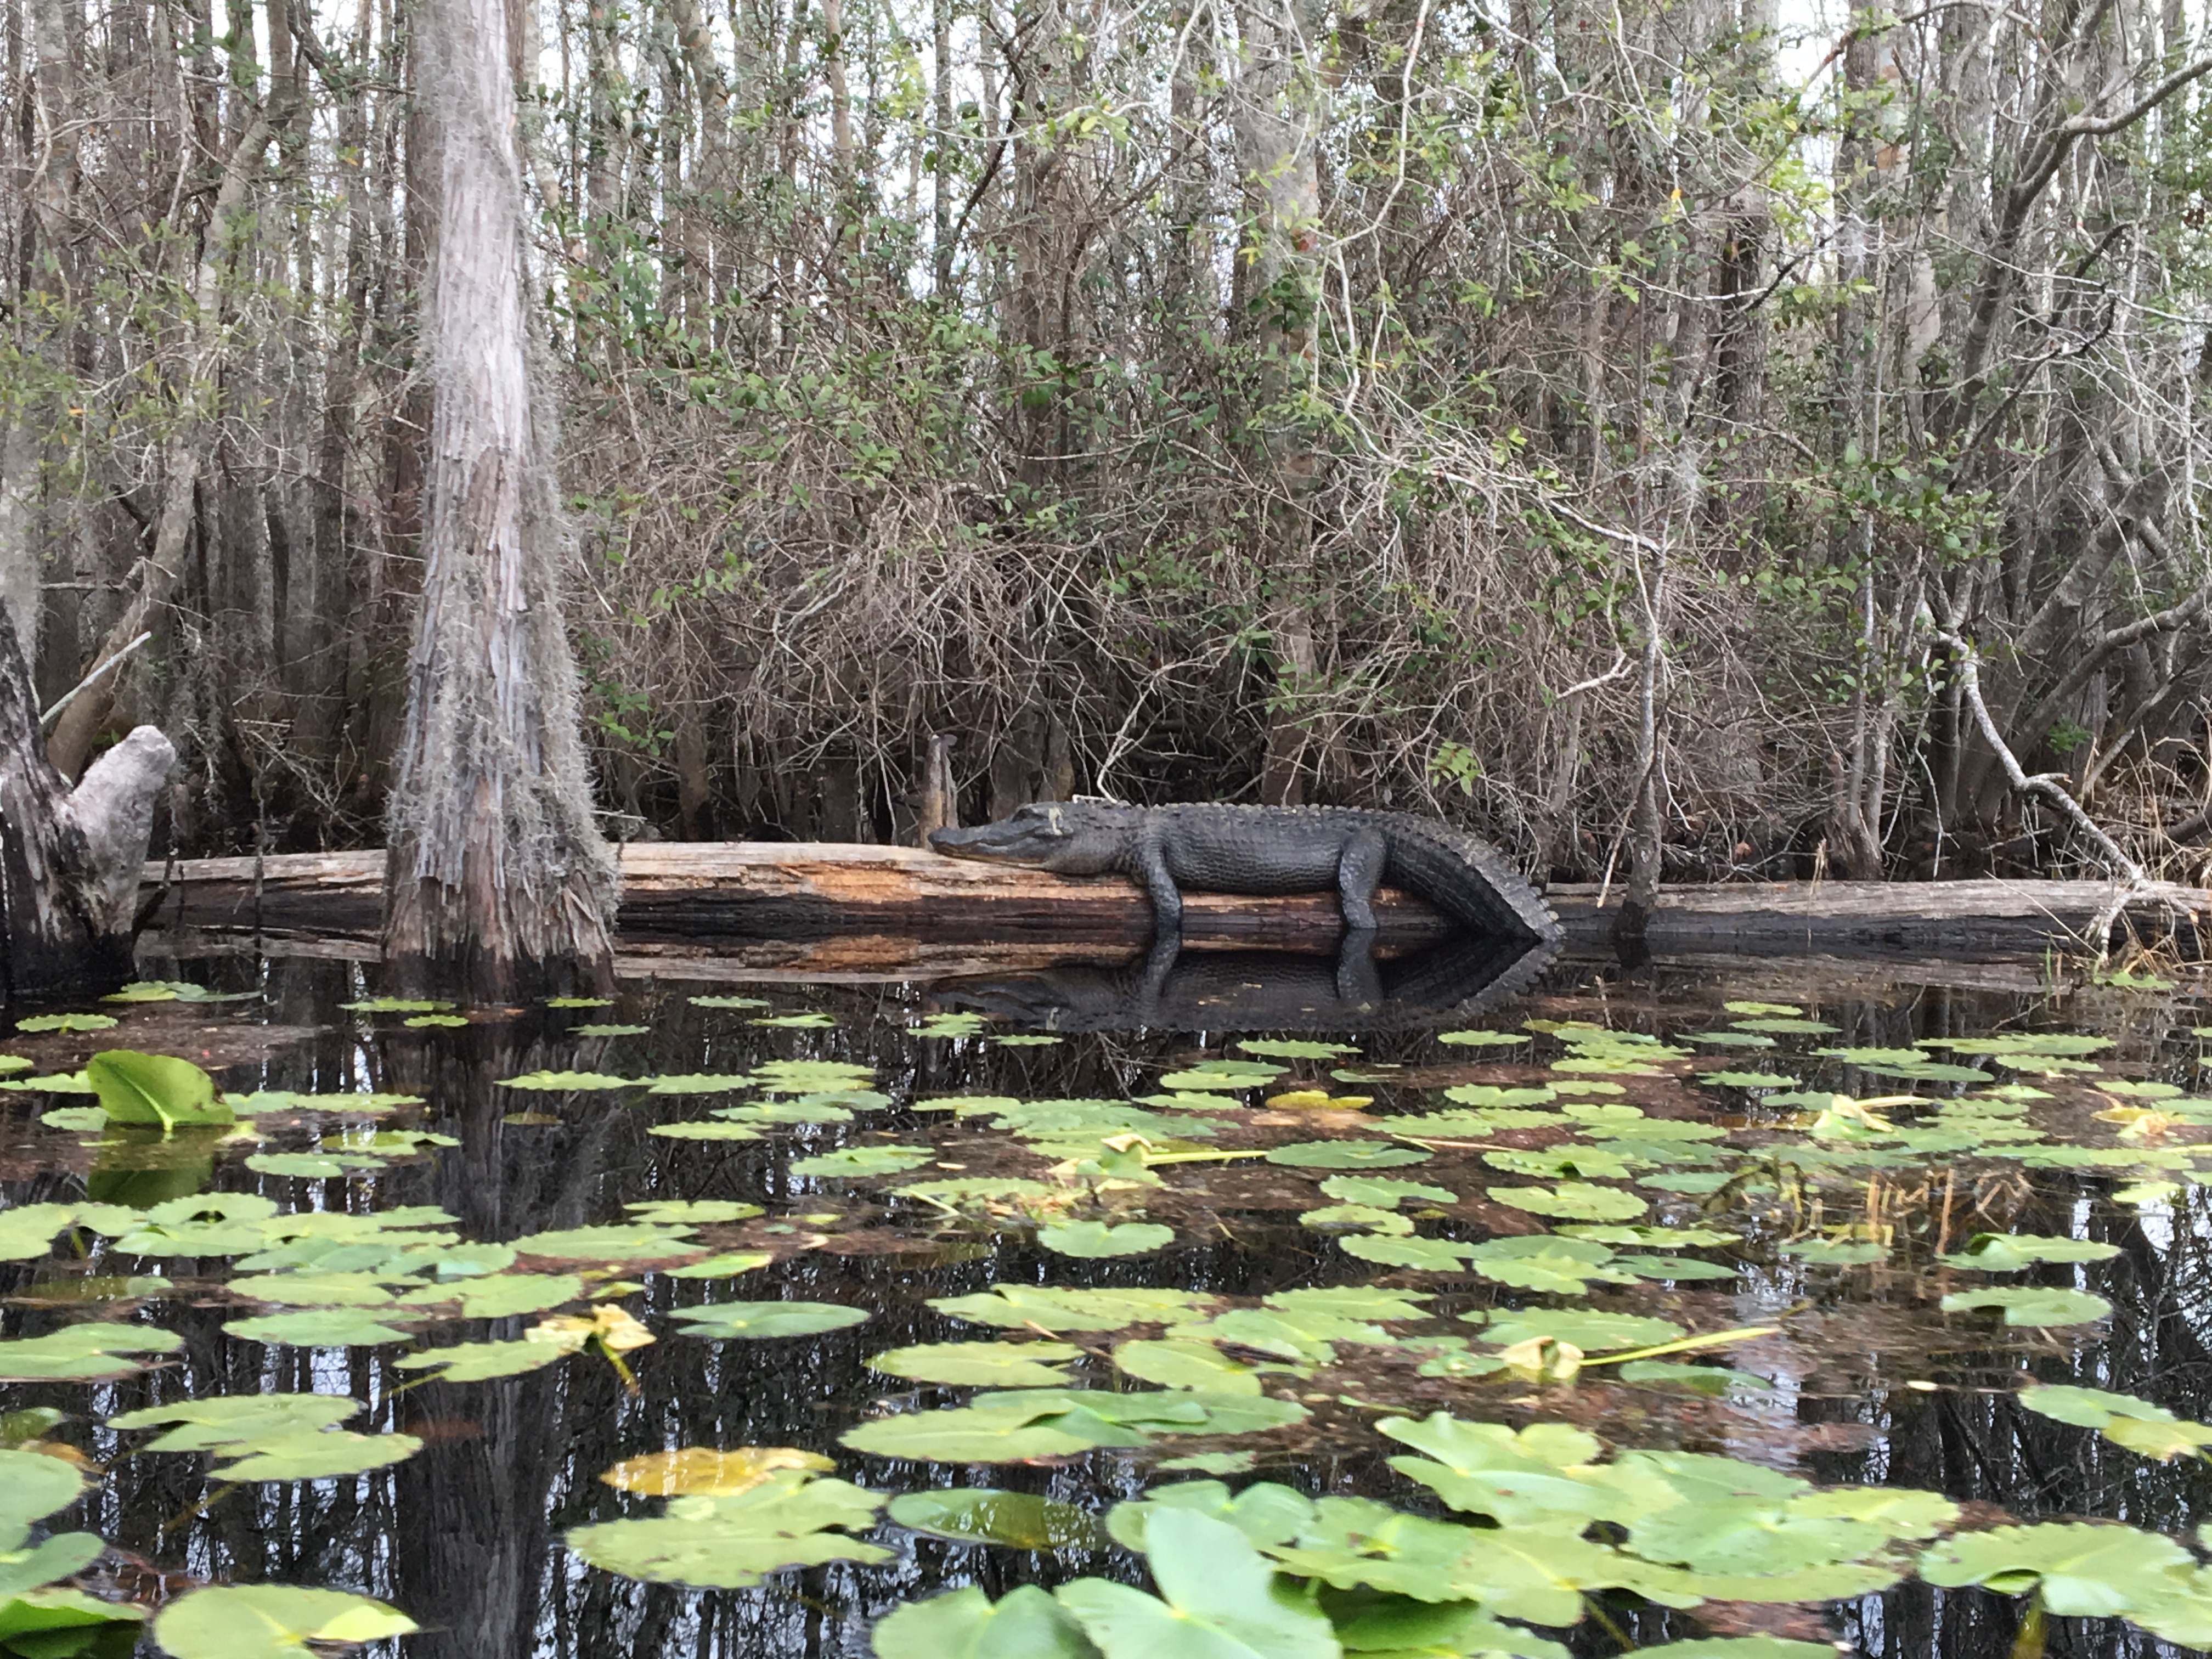 Okefenokee Swamp: “There's no other place in the world like the ...